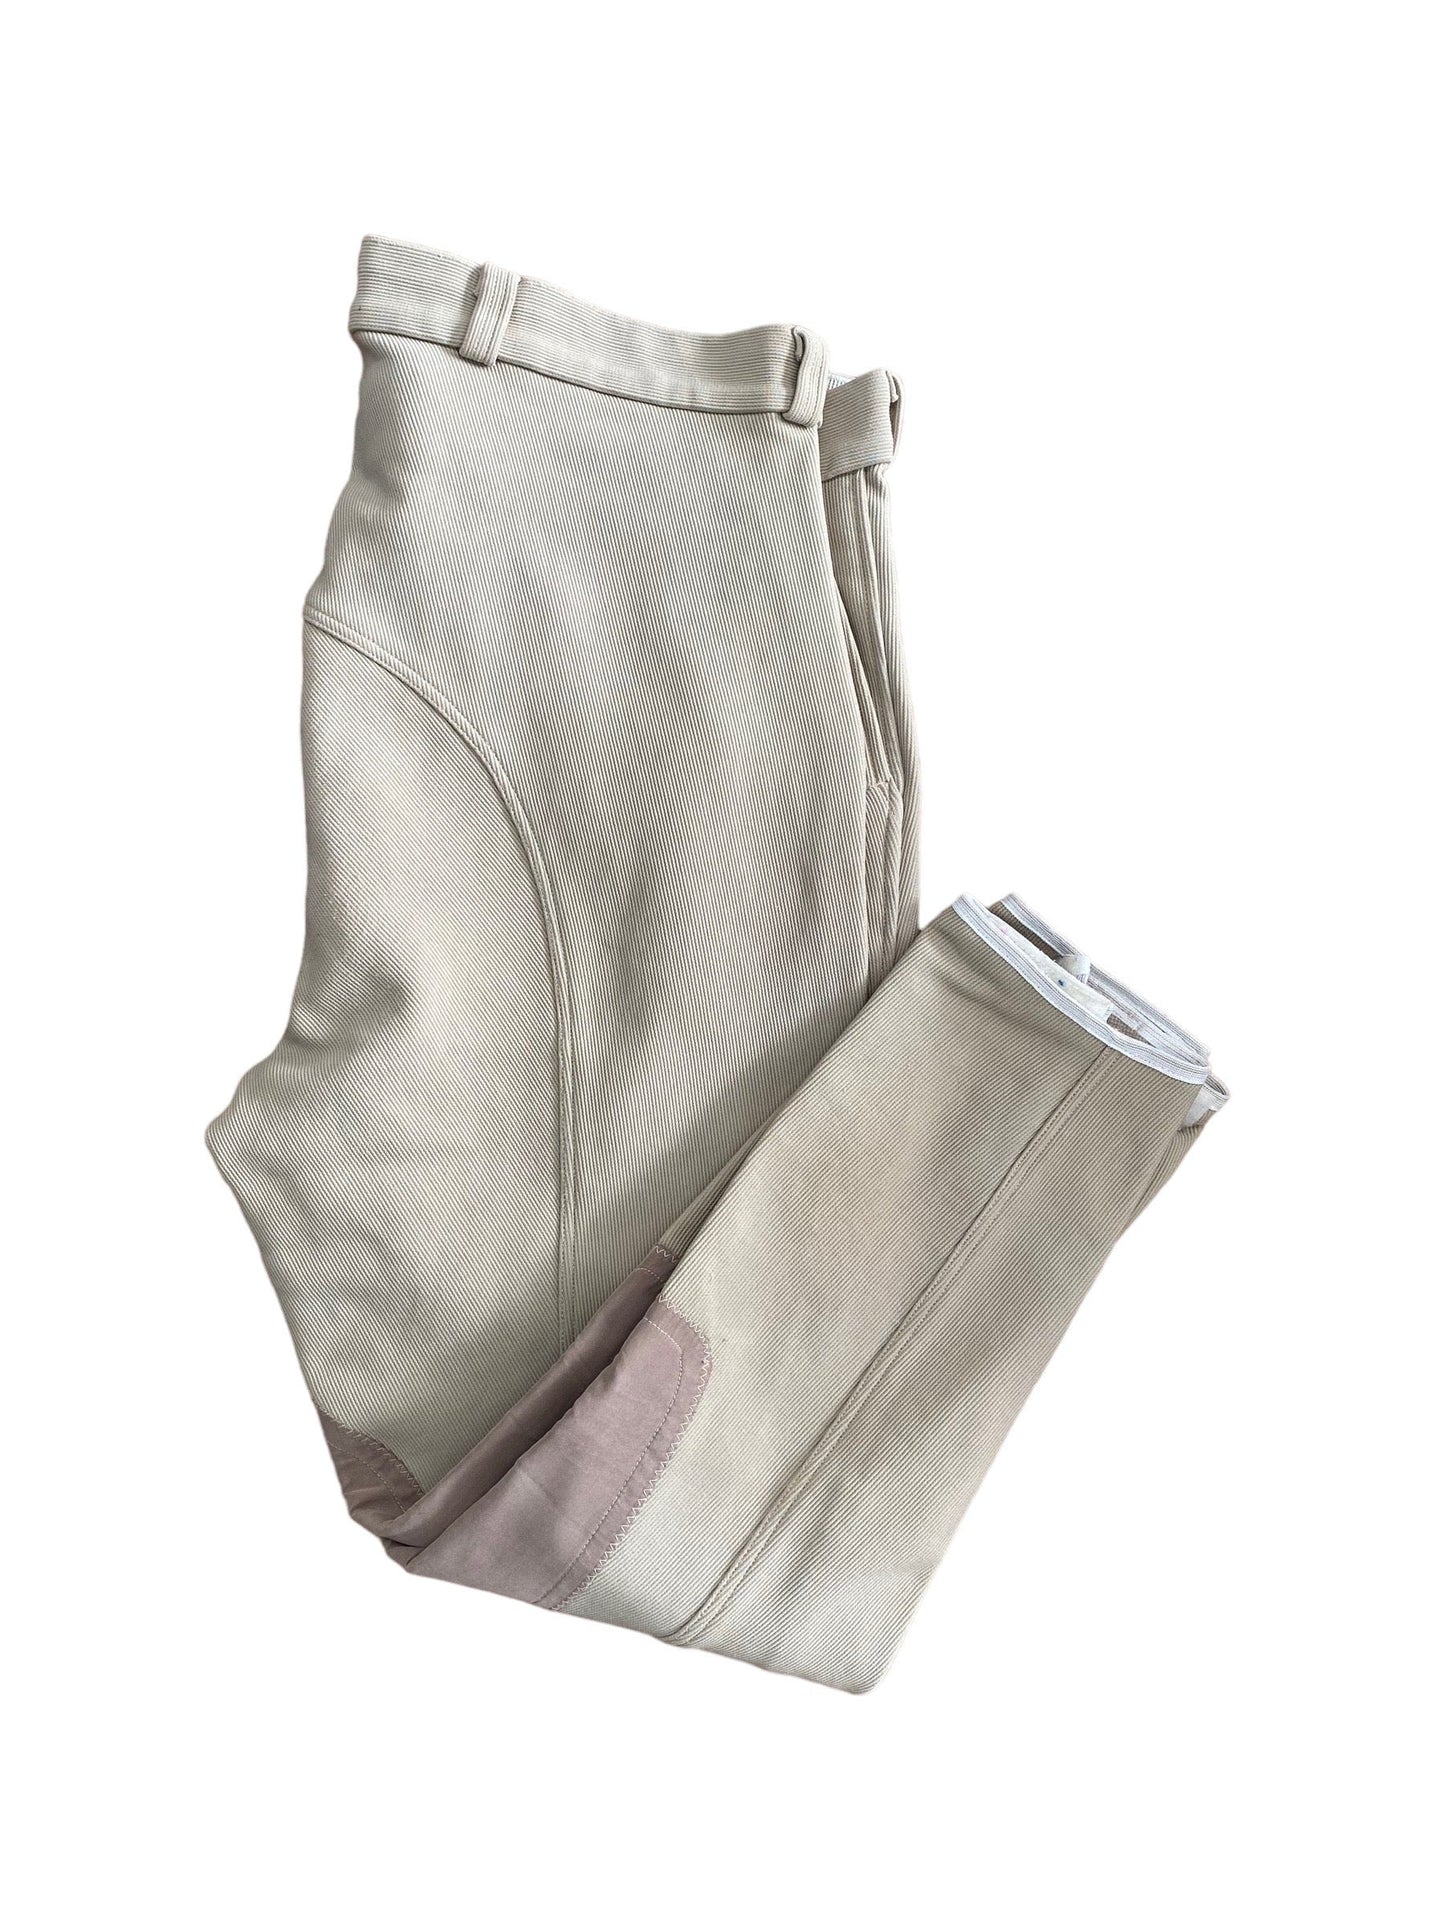 Secondhand Ascot Breeches MENS 36 Olive/Beige (234910)